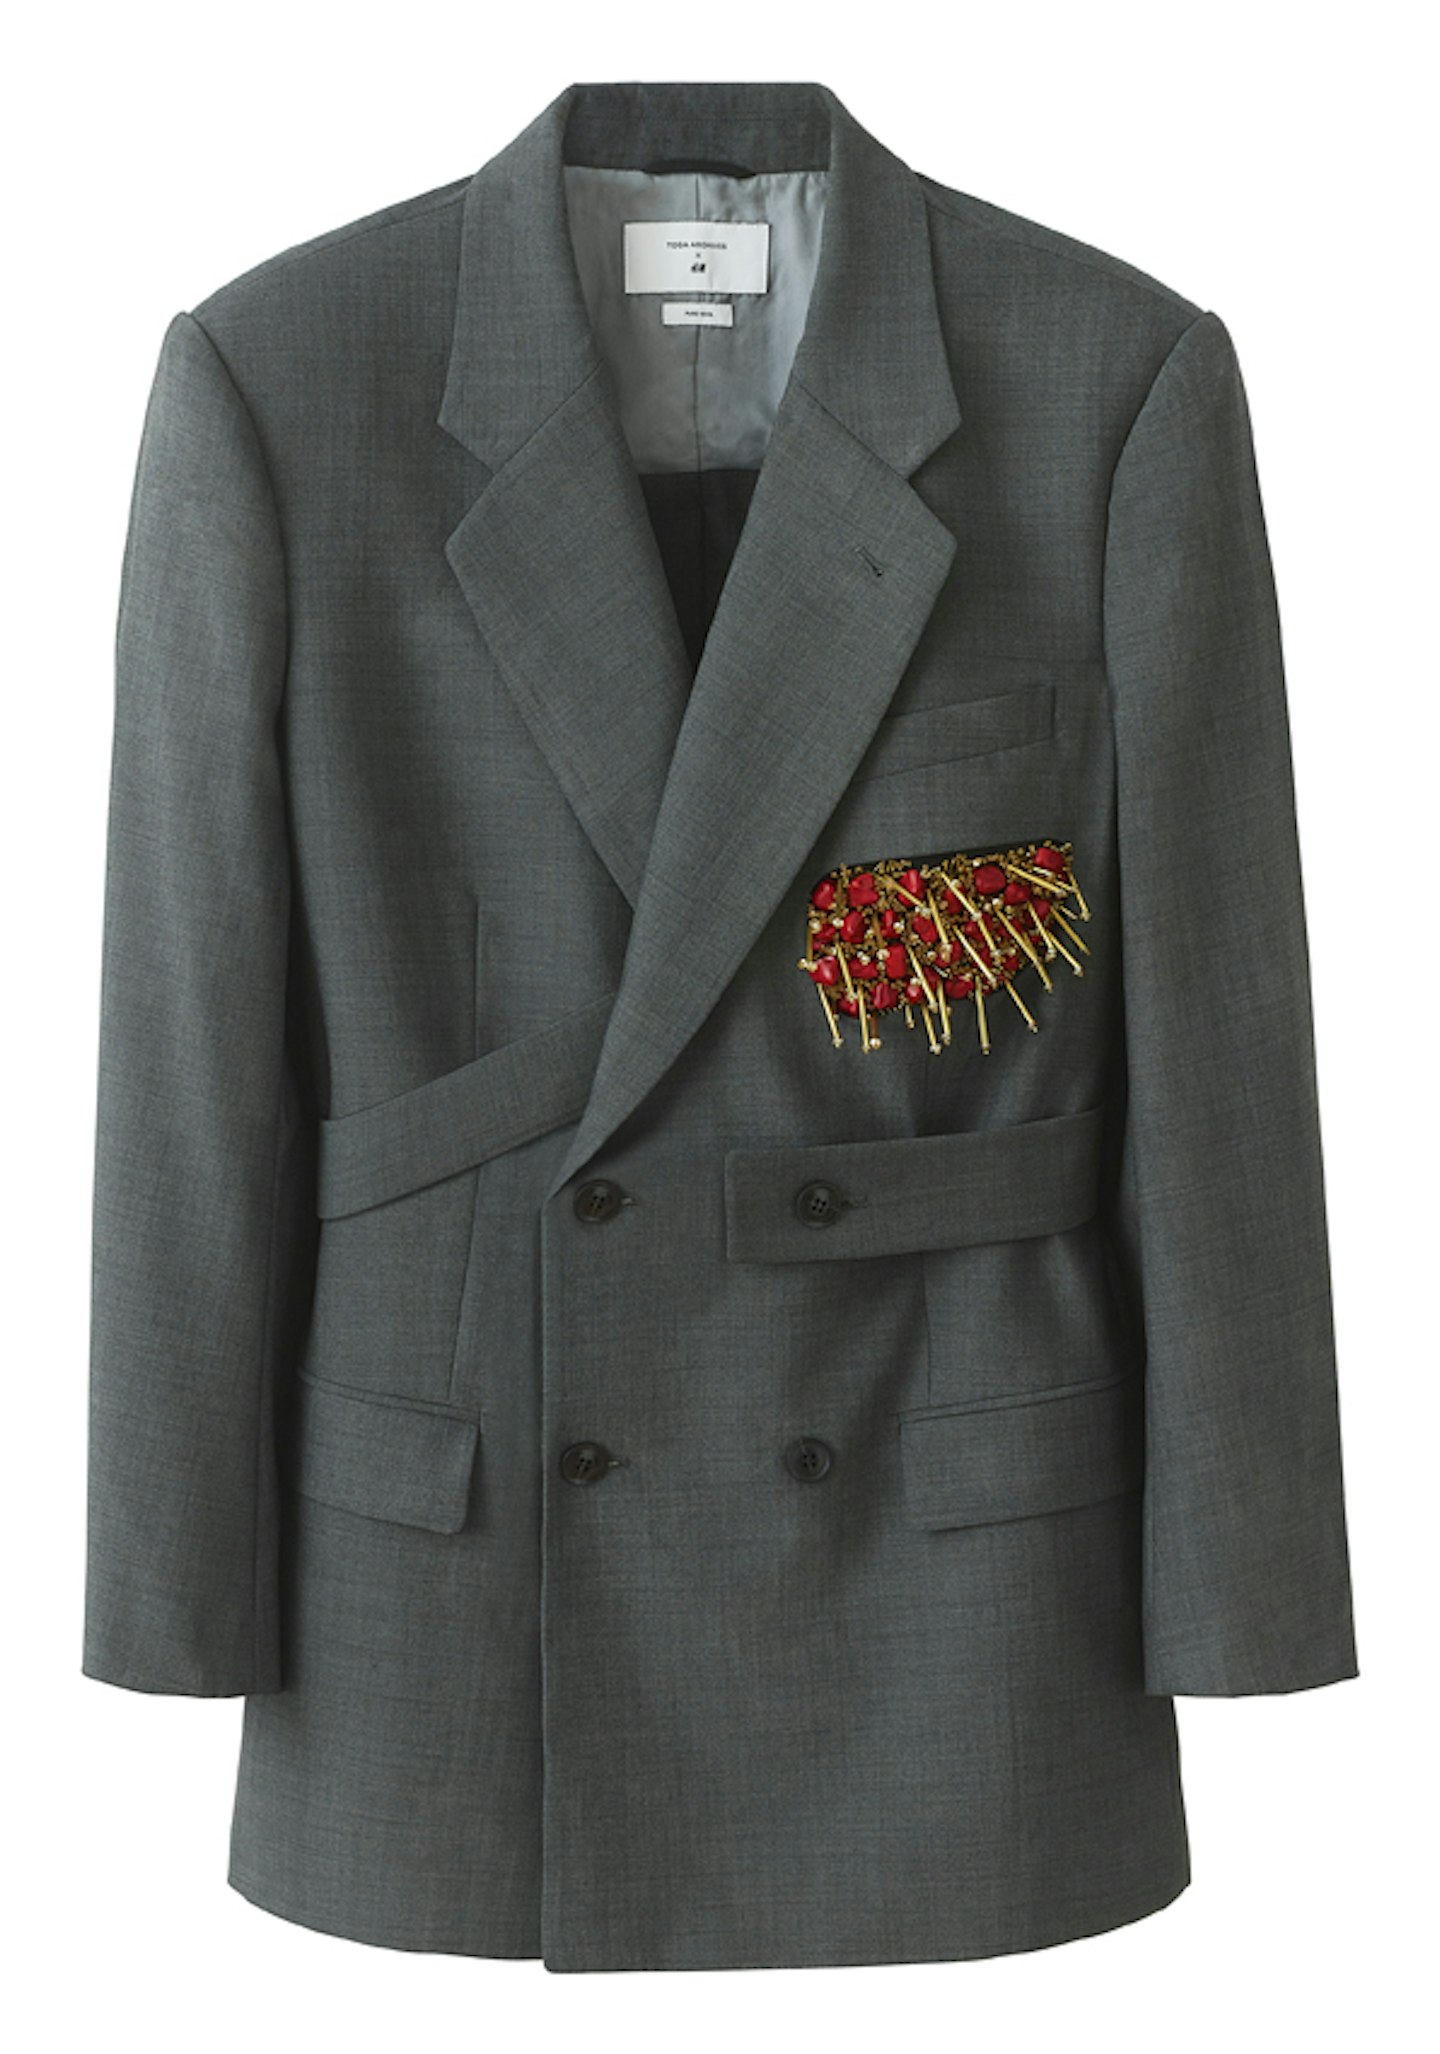 TOGA ARCHIVES x H&M, Grey Double Breasted Blazer, £119.99